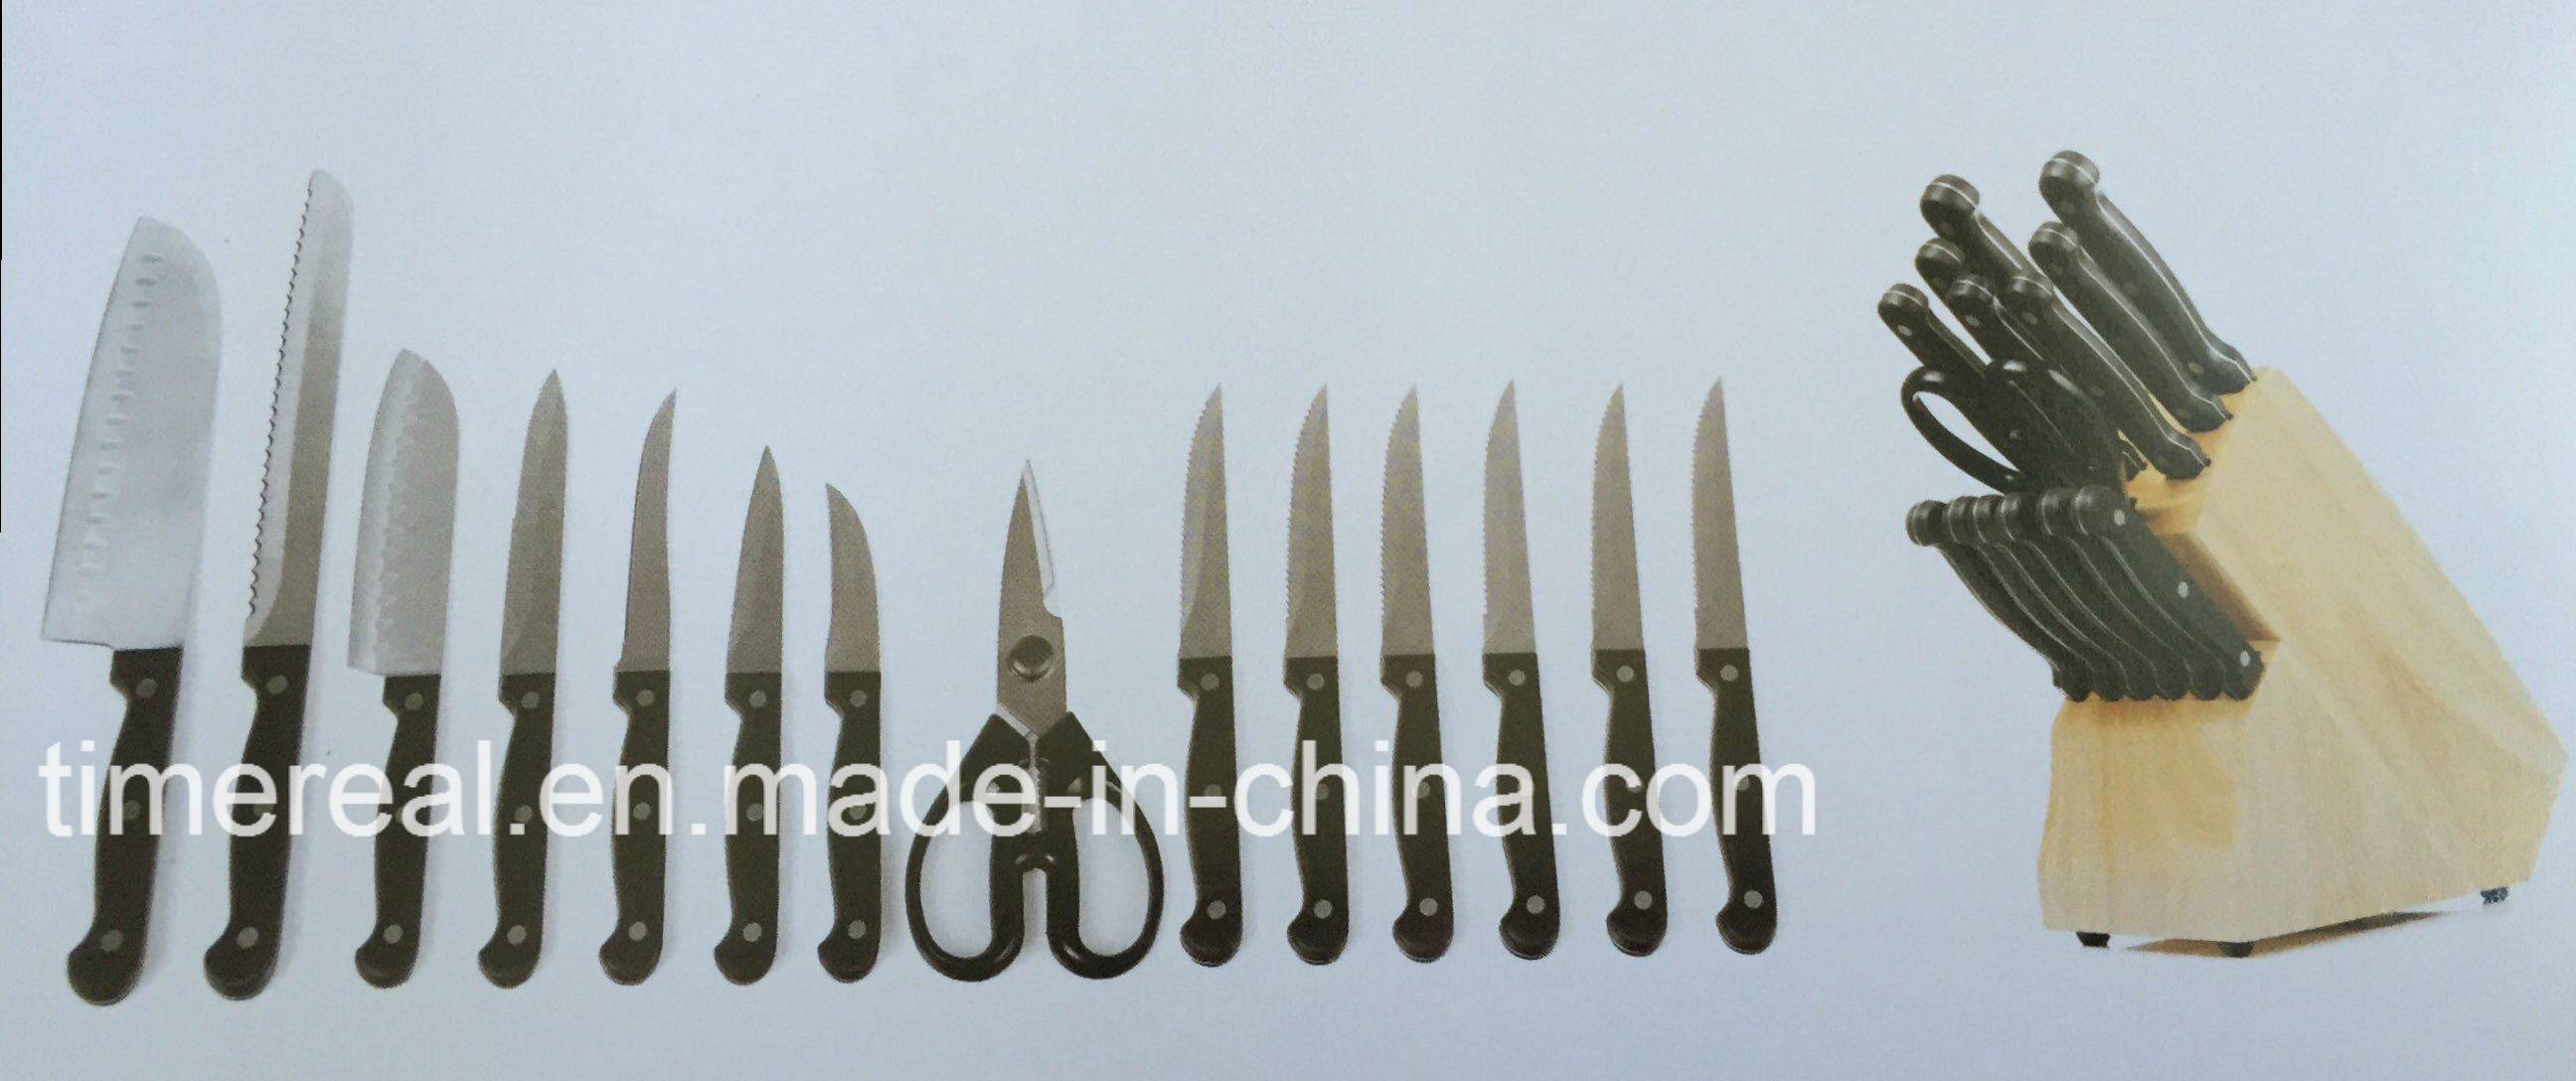 OEM Customized Gold Plated Dinnerware Set -
 Stainless Steel Kitchen Knives Set with Painting No. Fj-0054 – Long Prosper